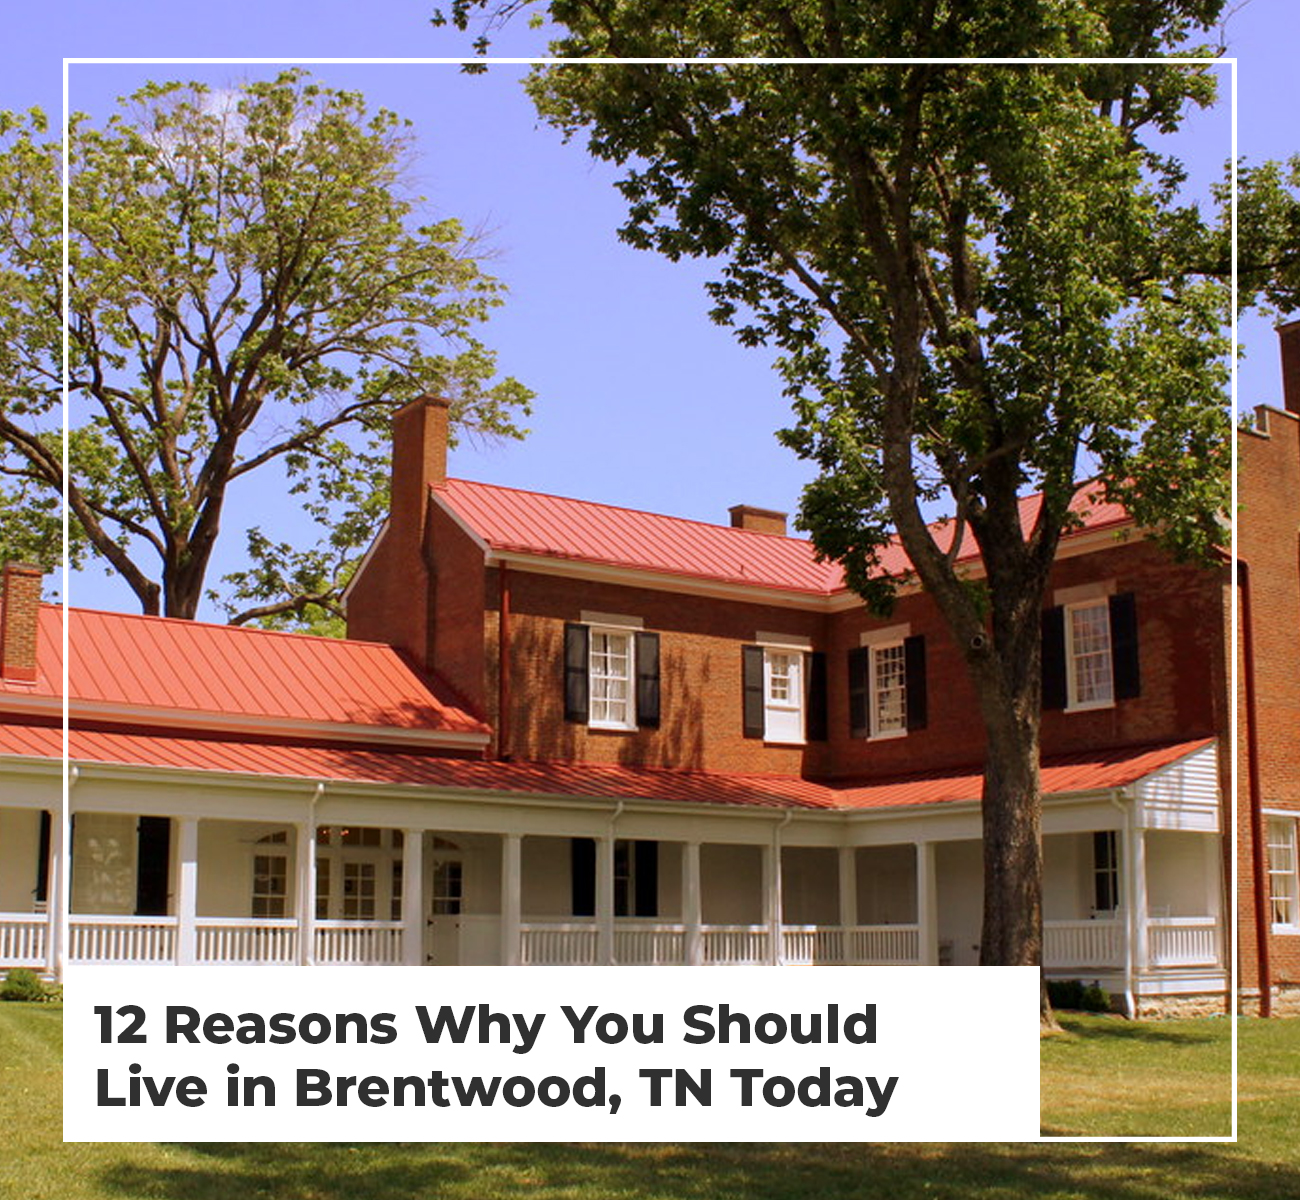 Moving To Brentwood, TN